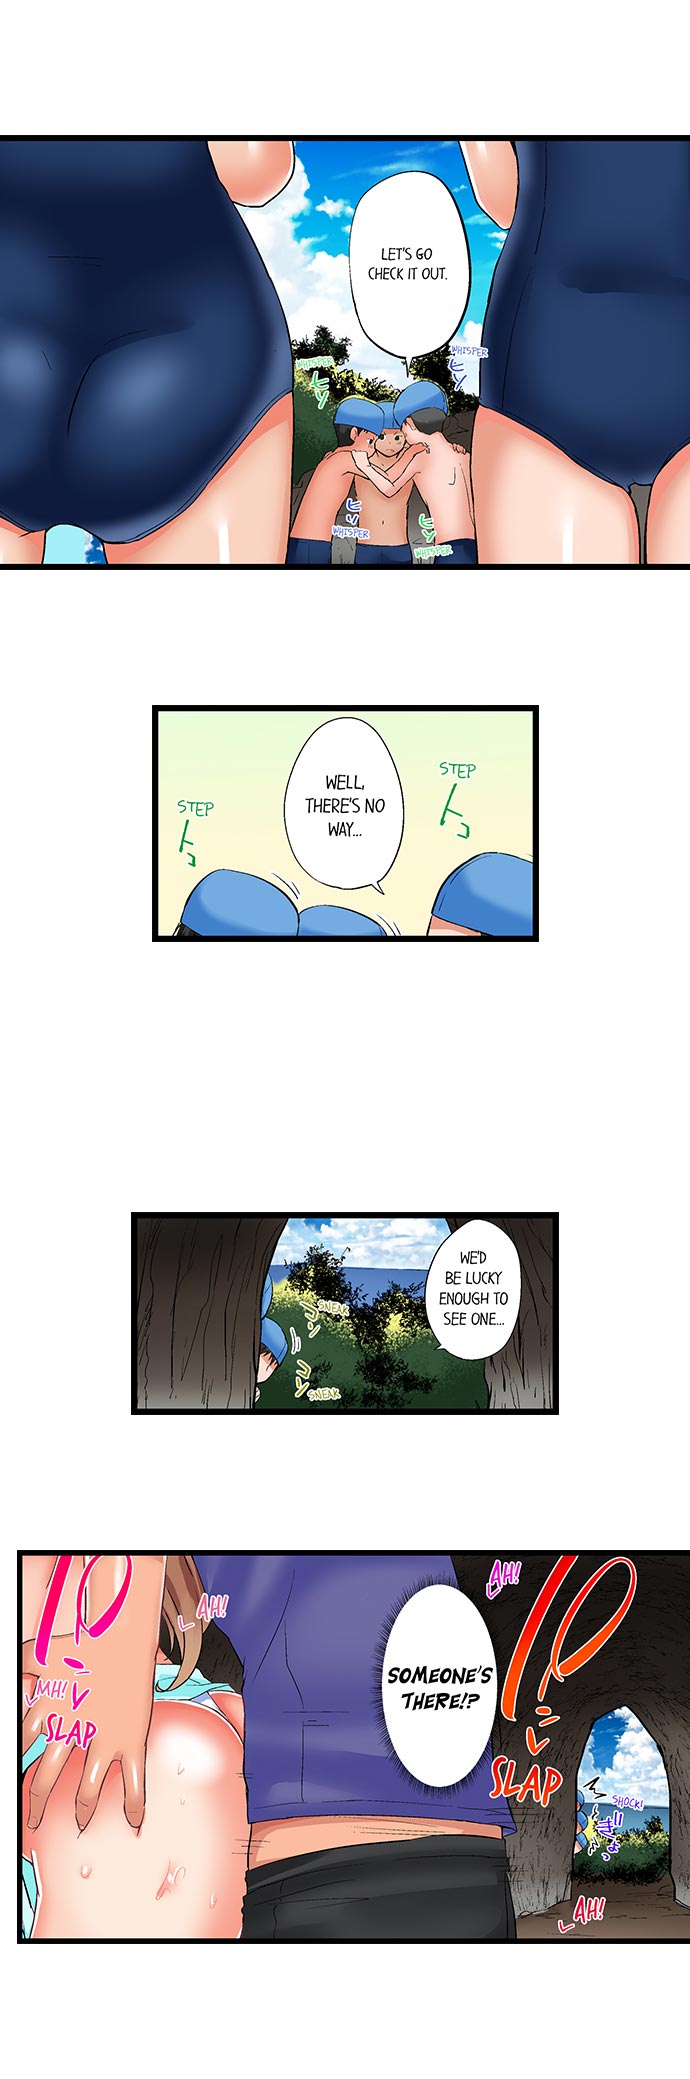 My Brother’s Slipped Inside Me in The Bathtub - Chapter 60 Page 3